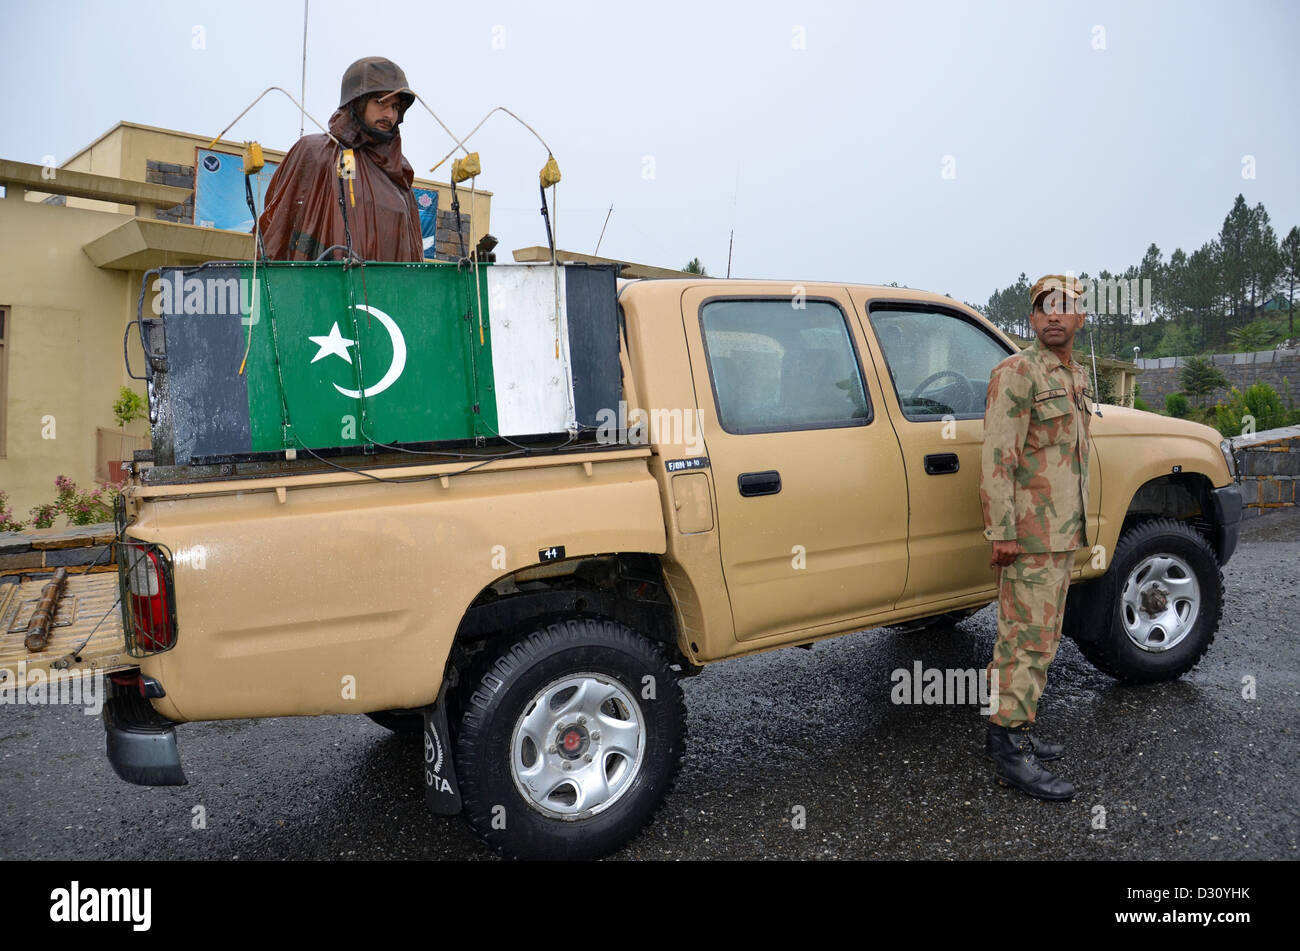 Pakistani soldiers prepare for patrol on pick-up truck: Swat Valley Stock Photo